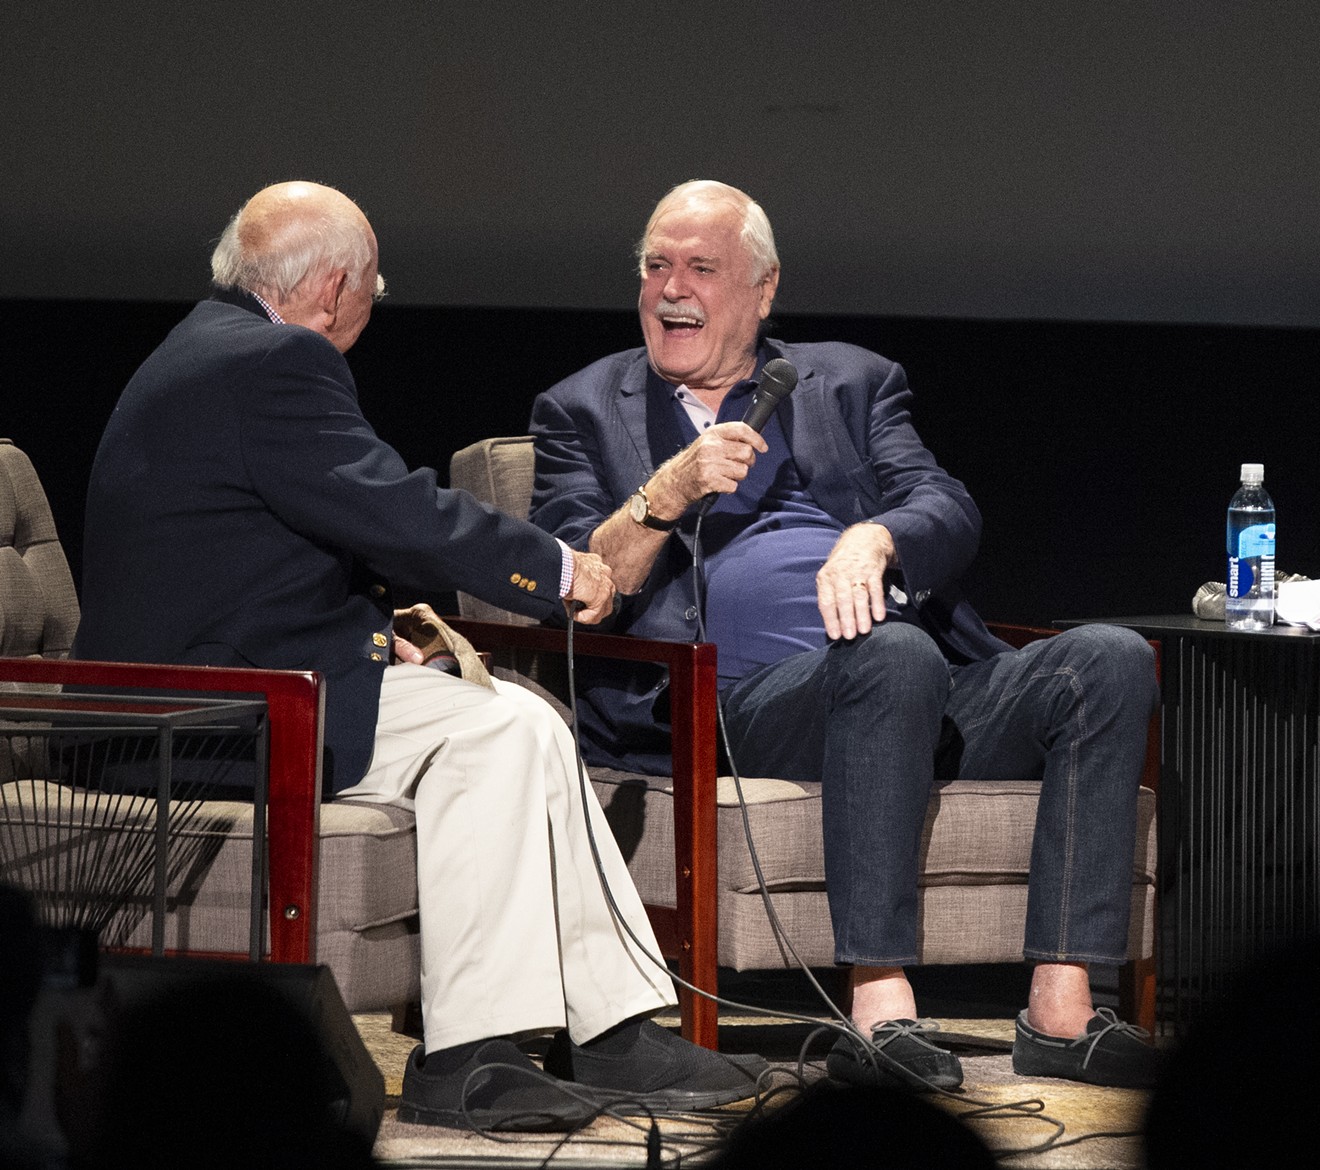 Former KERA program director Ron Devillier, who was the first to air Monty Python's Flying Circus on American televisions in 1975, joins John Cleese onstage at the Texas Theatre on Wednesday. Cleese was in town to receive the Ernie Kovacs Award from the Dallas VideoFest.